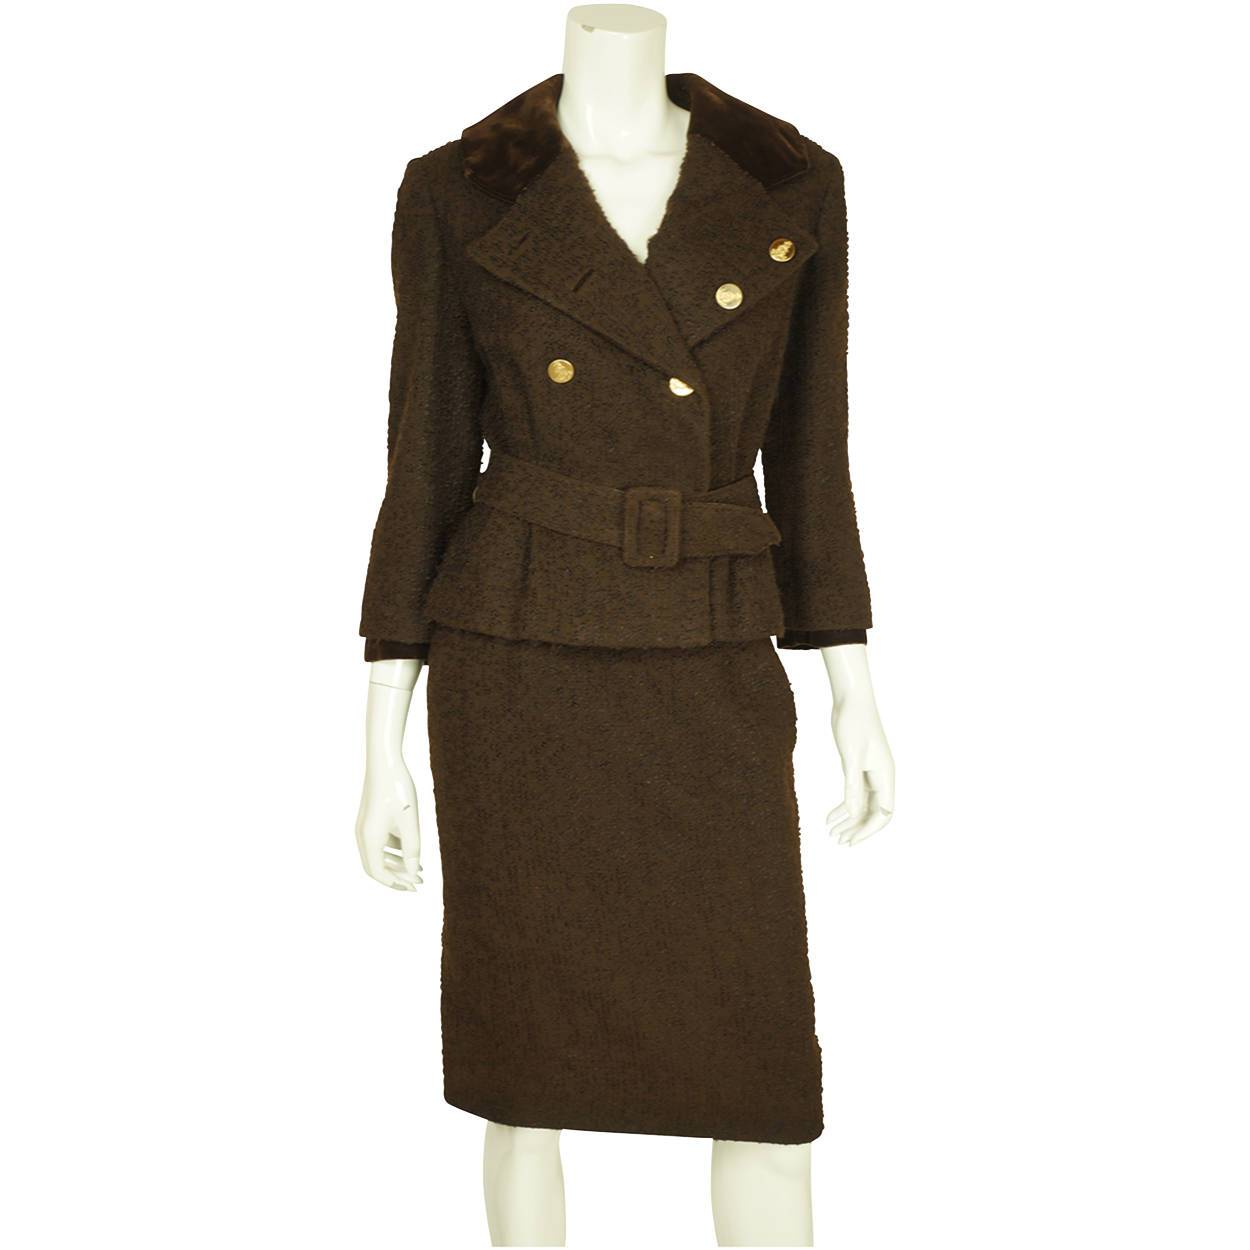 Vintage 1950s Skirt Suit Brown Boucle Wool Hand Tailored Size S M